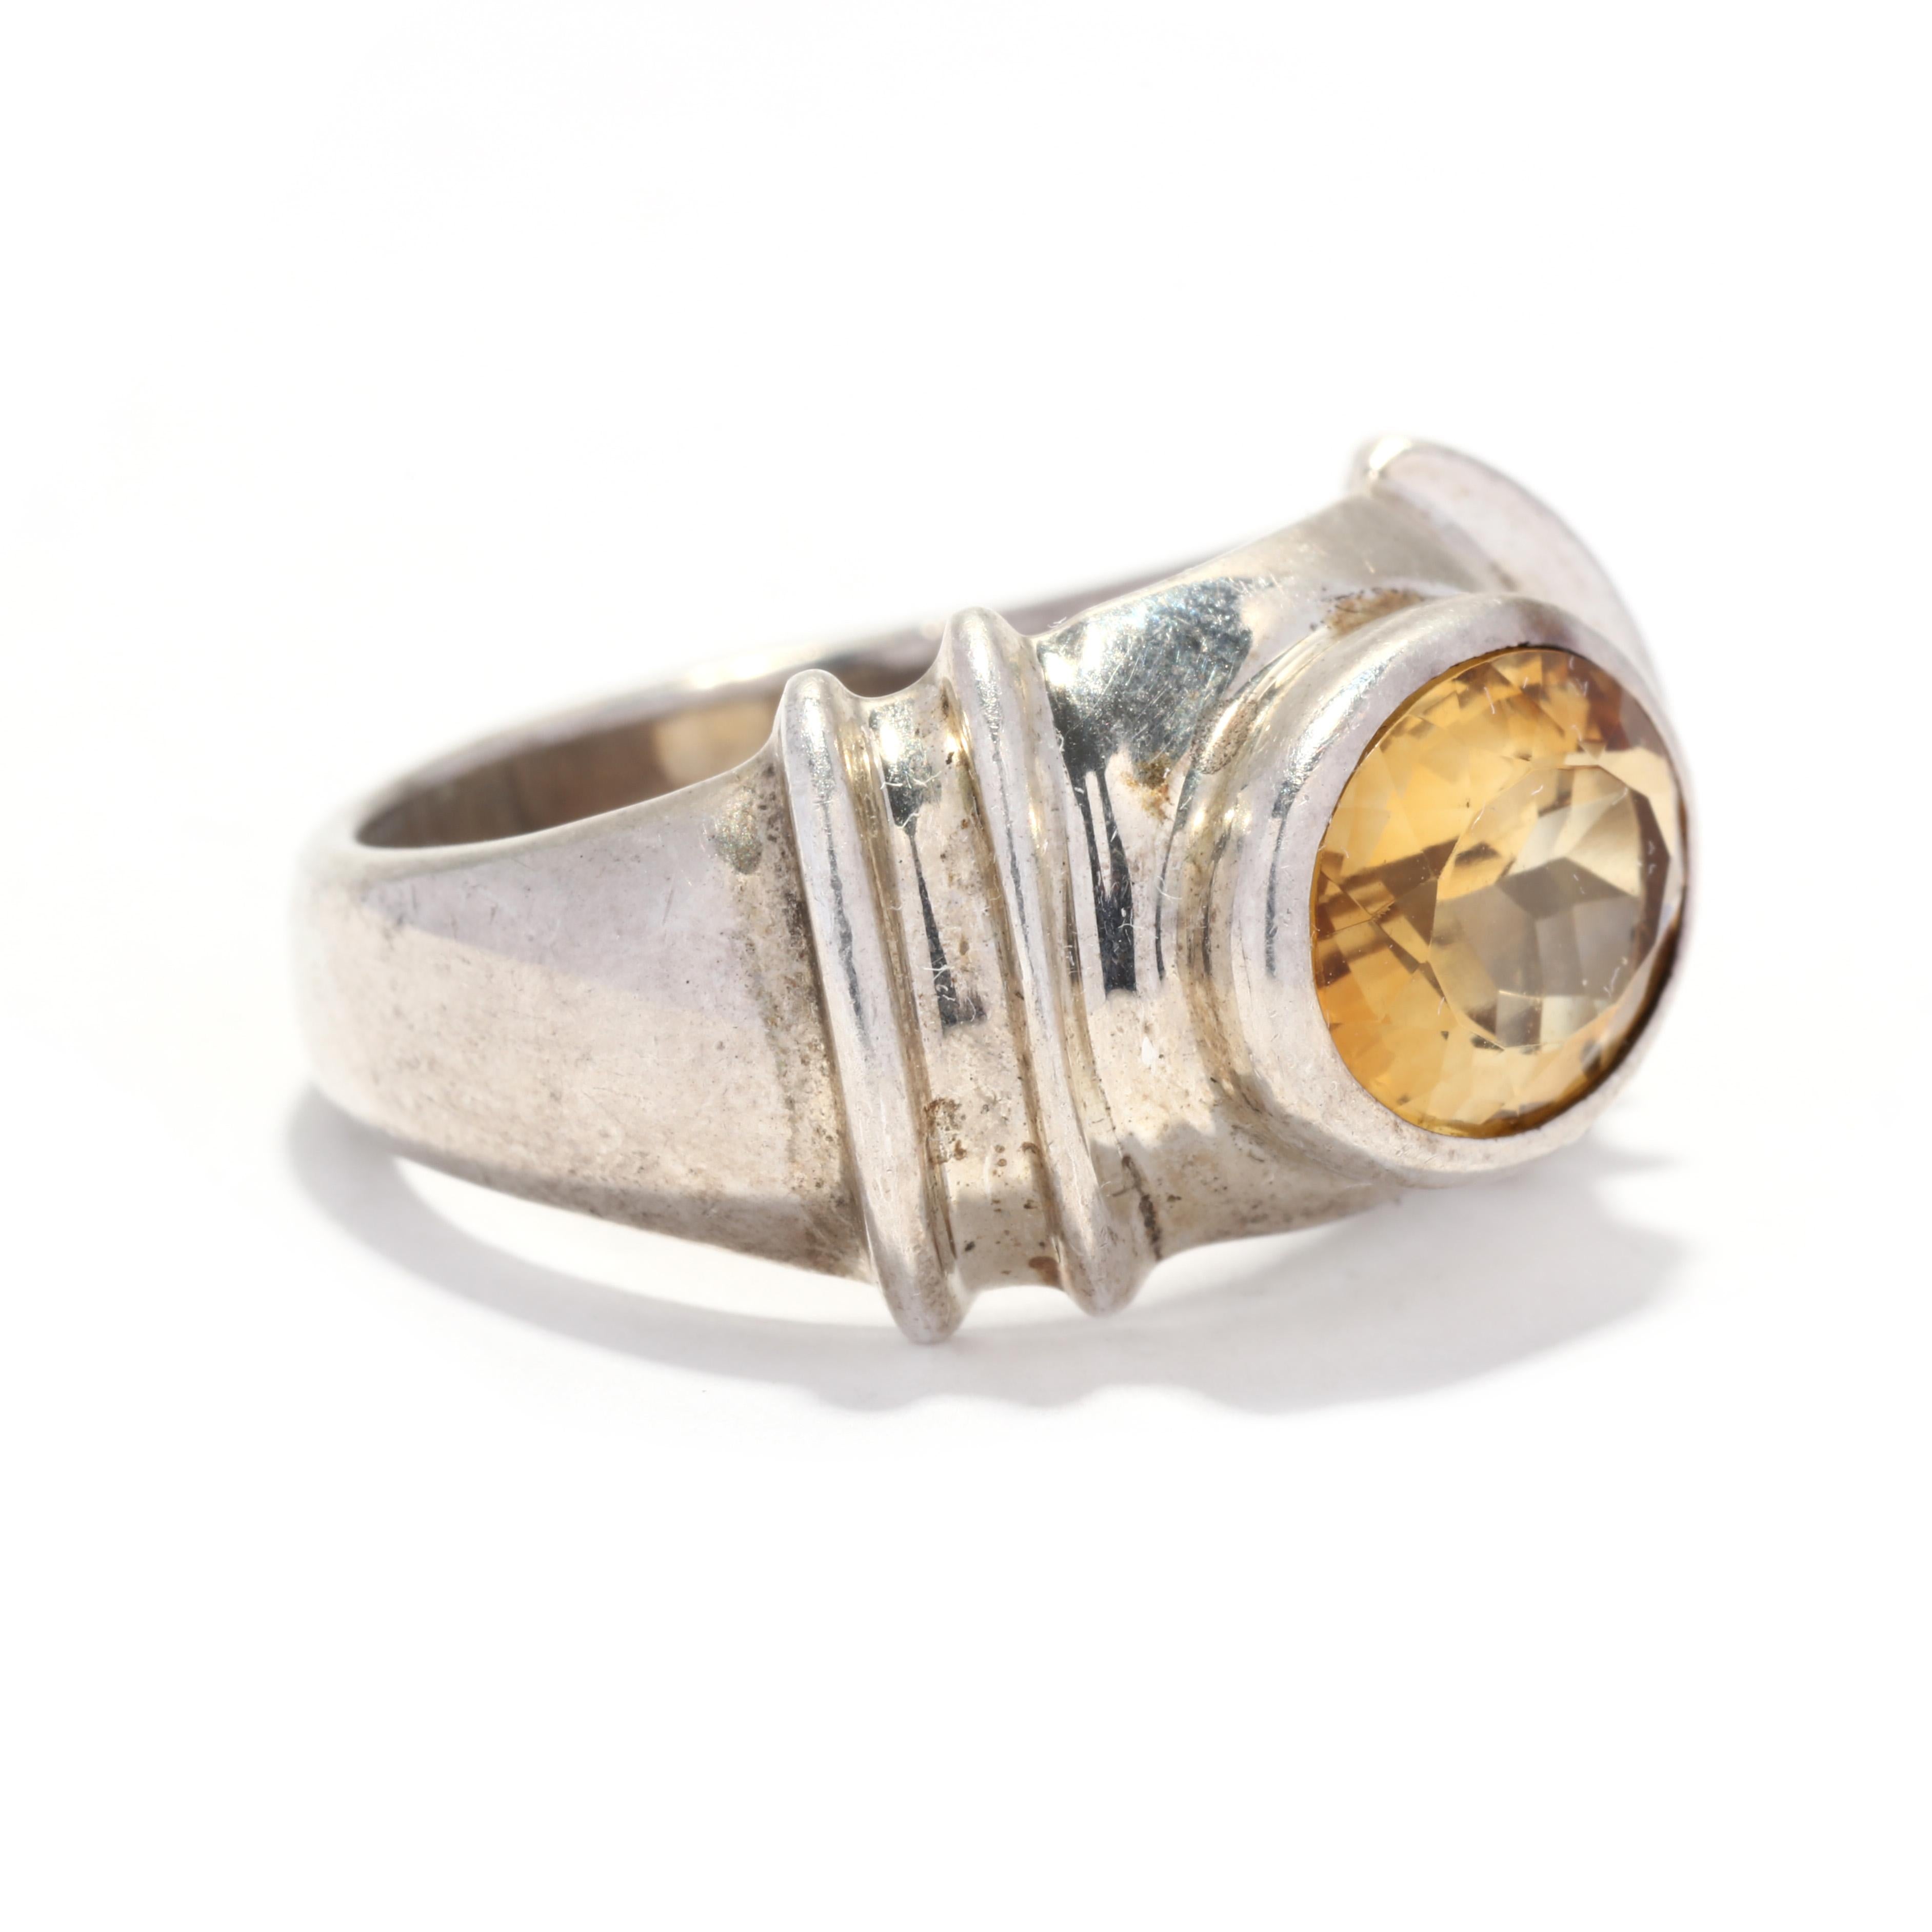 A vintage sterling silver citrine ring. This November birthstone ring features a bezel set, oval citrine weighing approximately 3.25 carats and with a ribbed, tapered band.

Stones:
- citrine, 1 stone
- oval cut
- 11 x 9 mm
- approximately 3.25